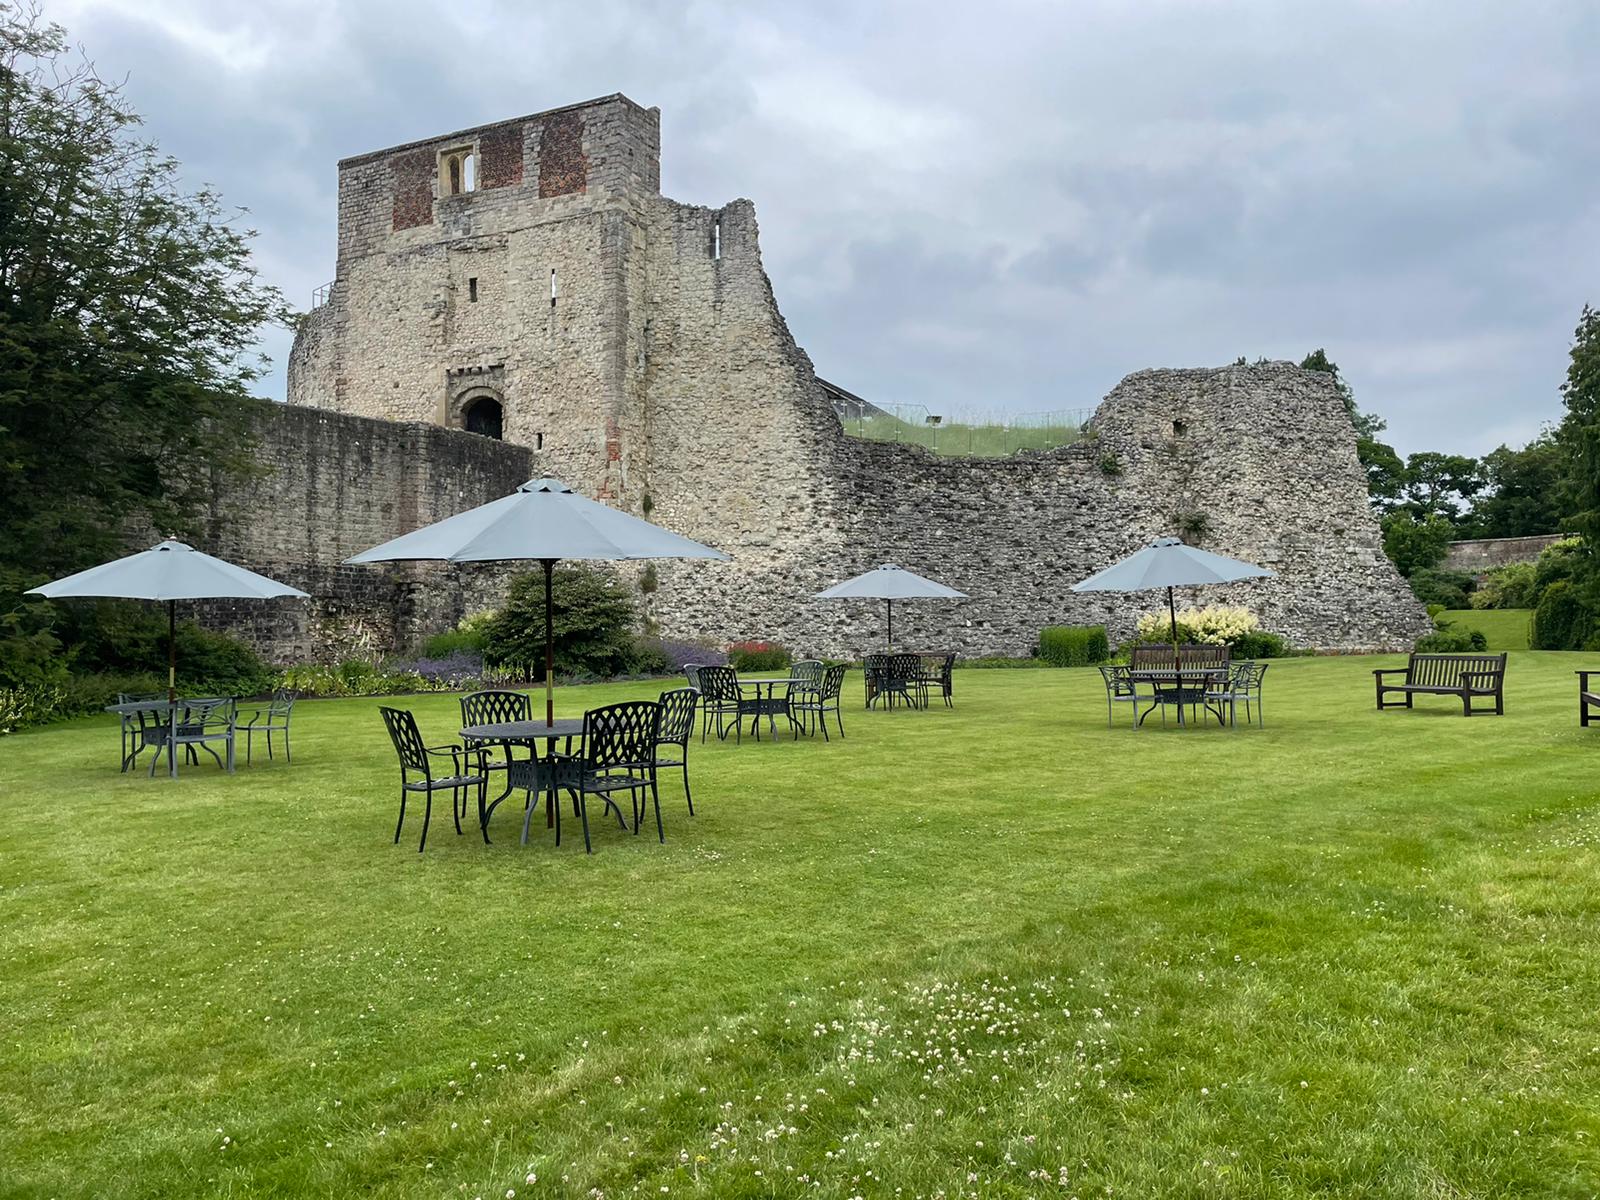 Outdoor space for entertaining at Farnham Castle in Surrey